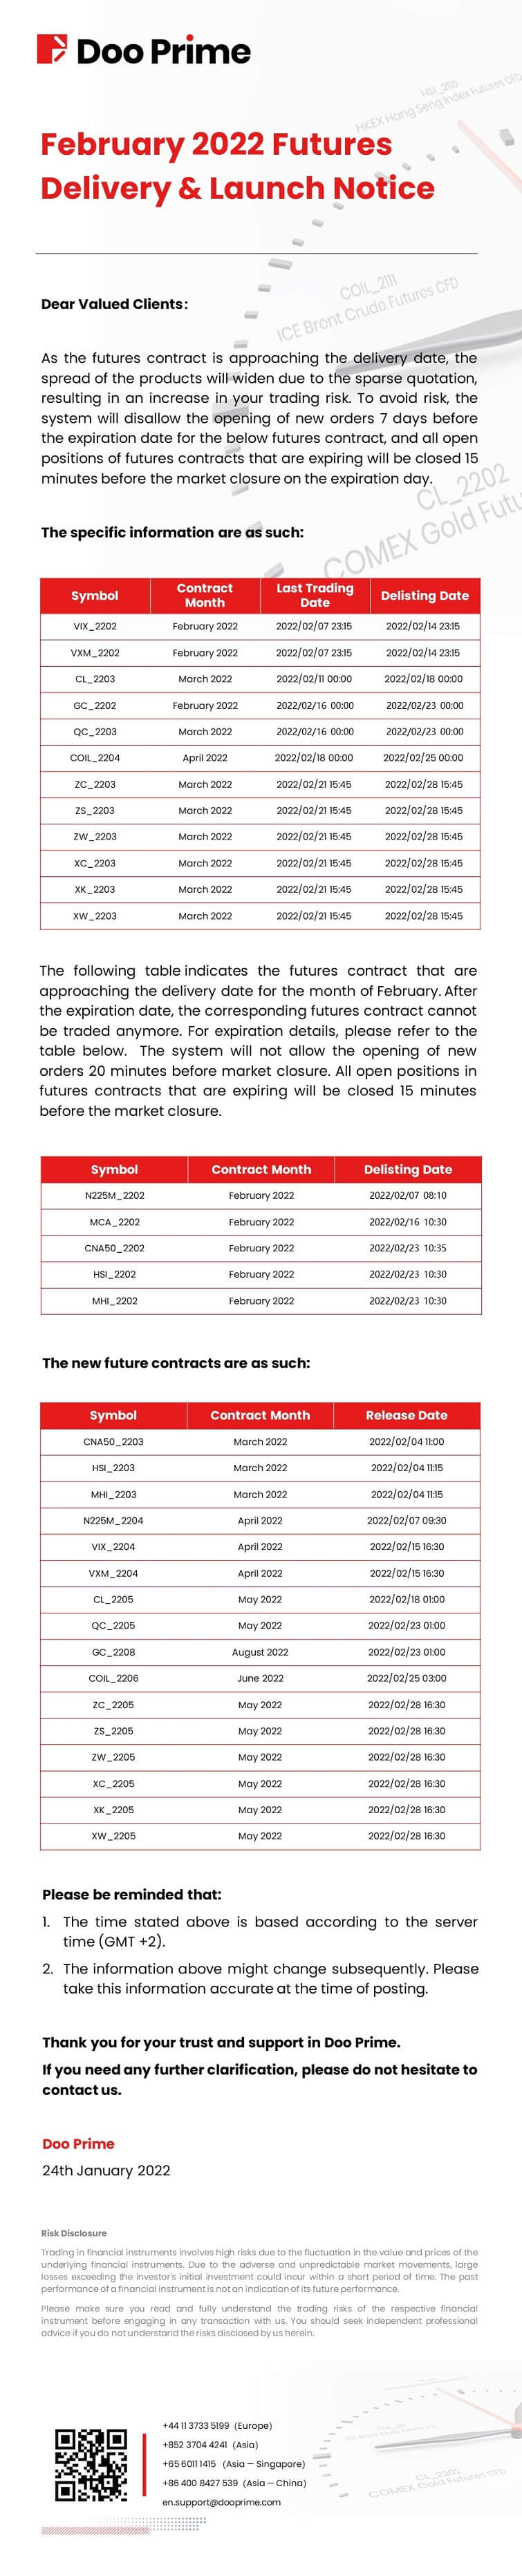 Doo Prime February 2022 Futures Delivery & Launch Notice